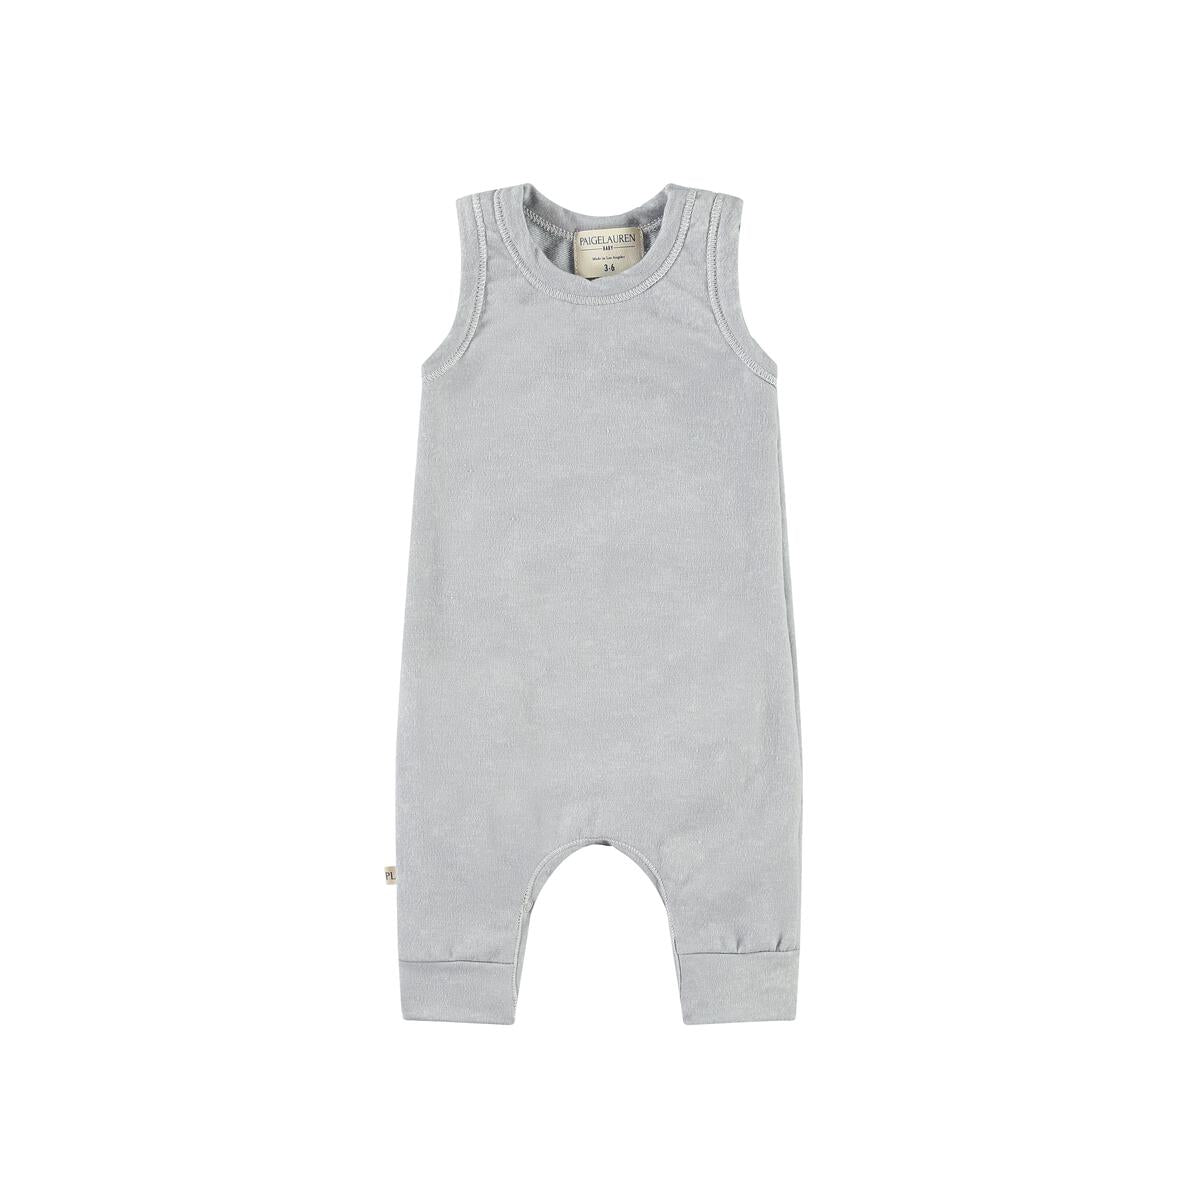 Whim-zzz French Terry Burn Out Tank Romper - Grey - Twinkle Twinkle Little One